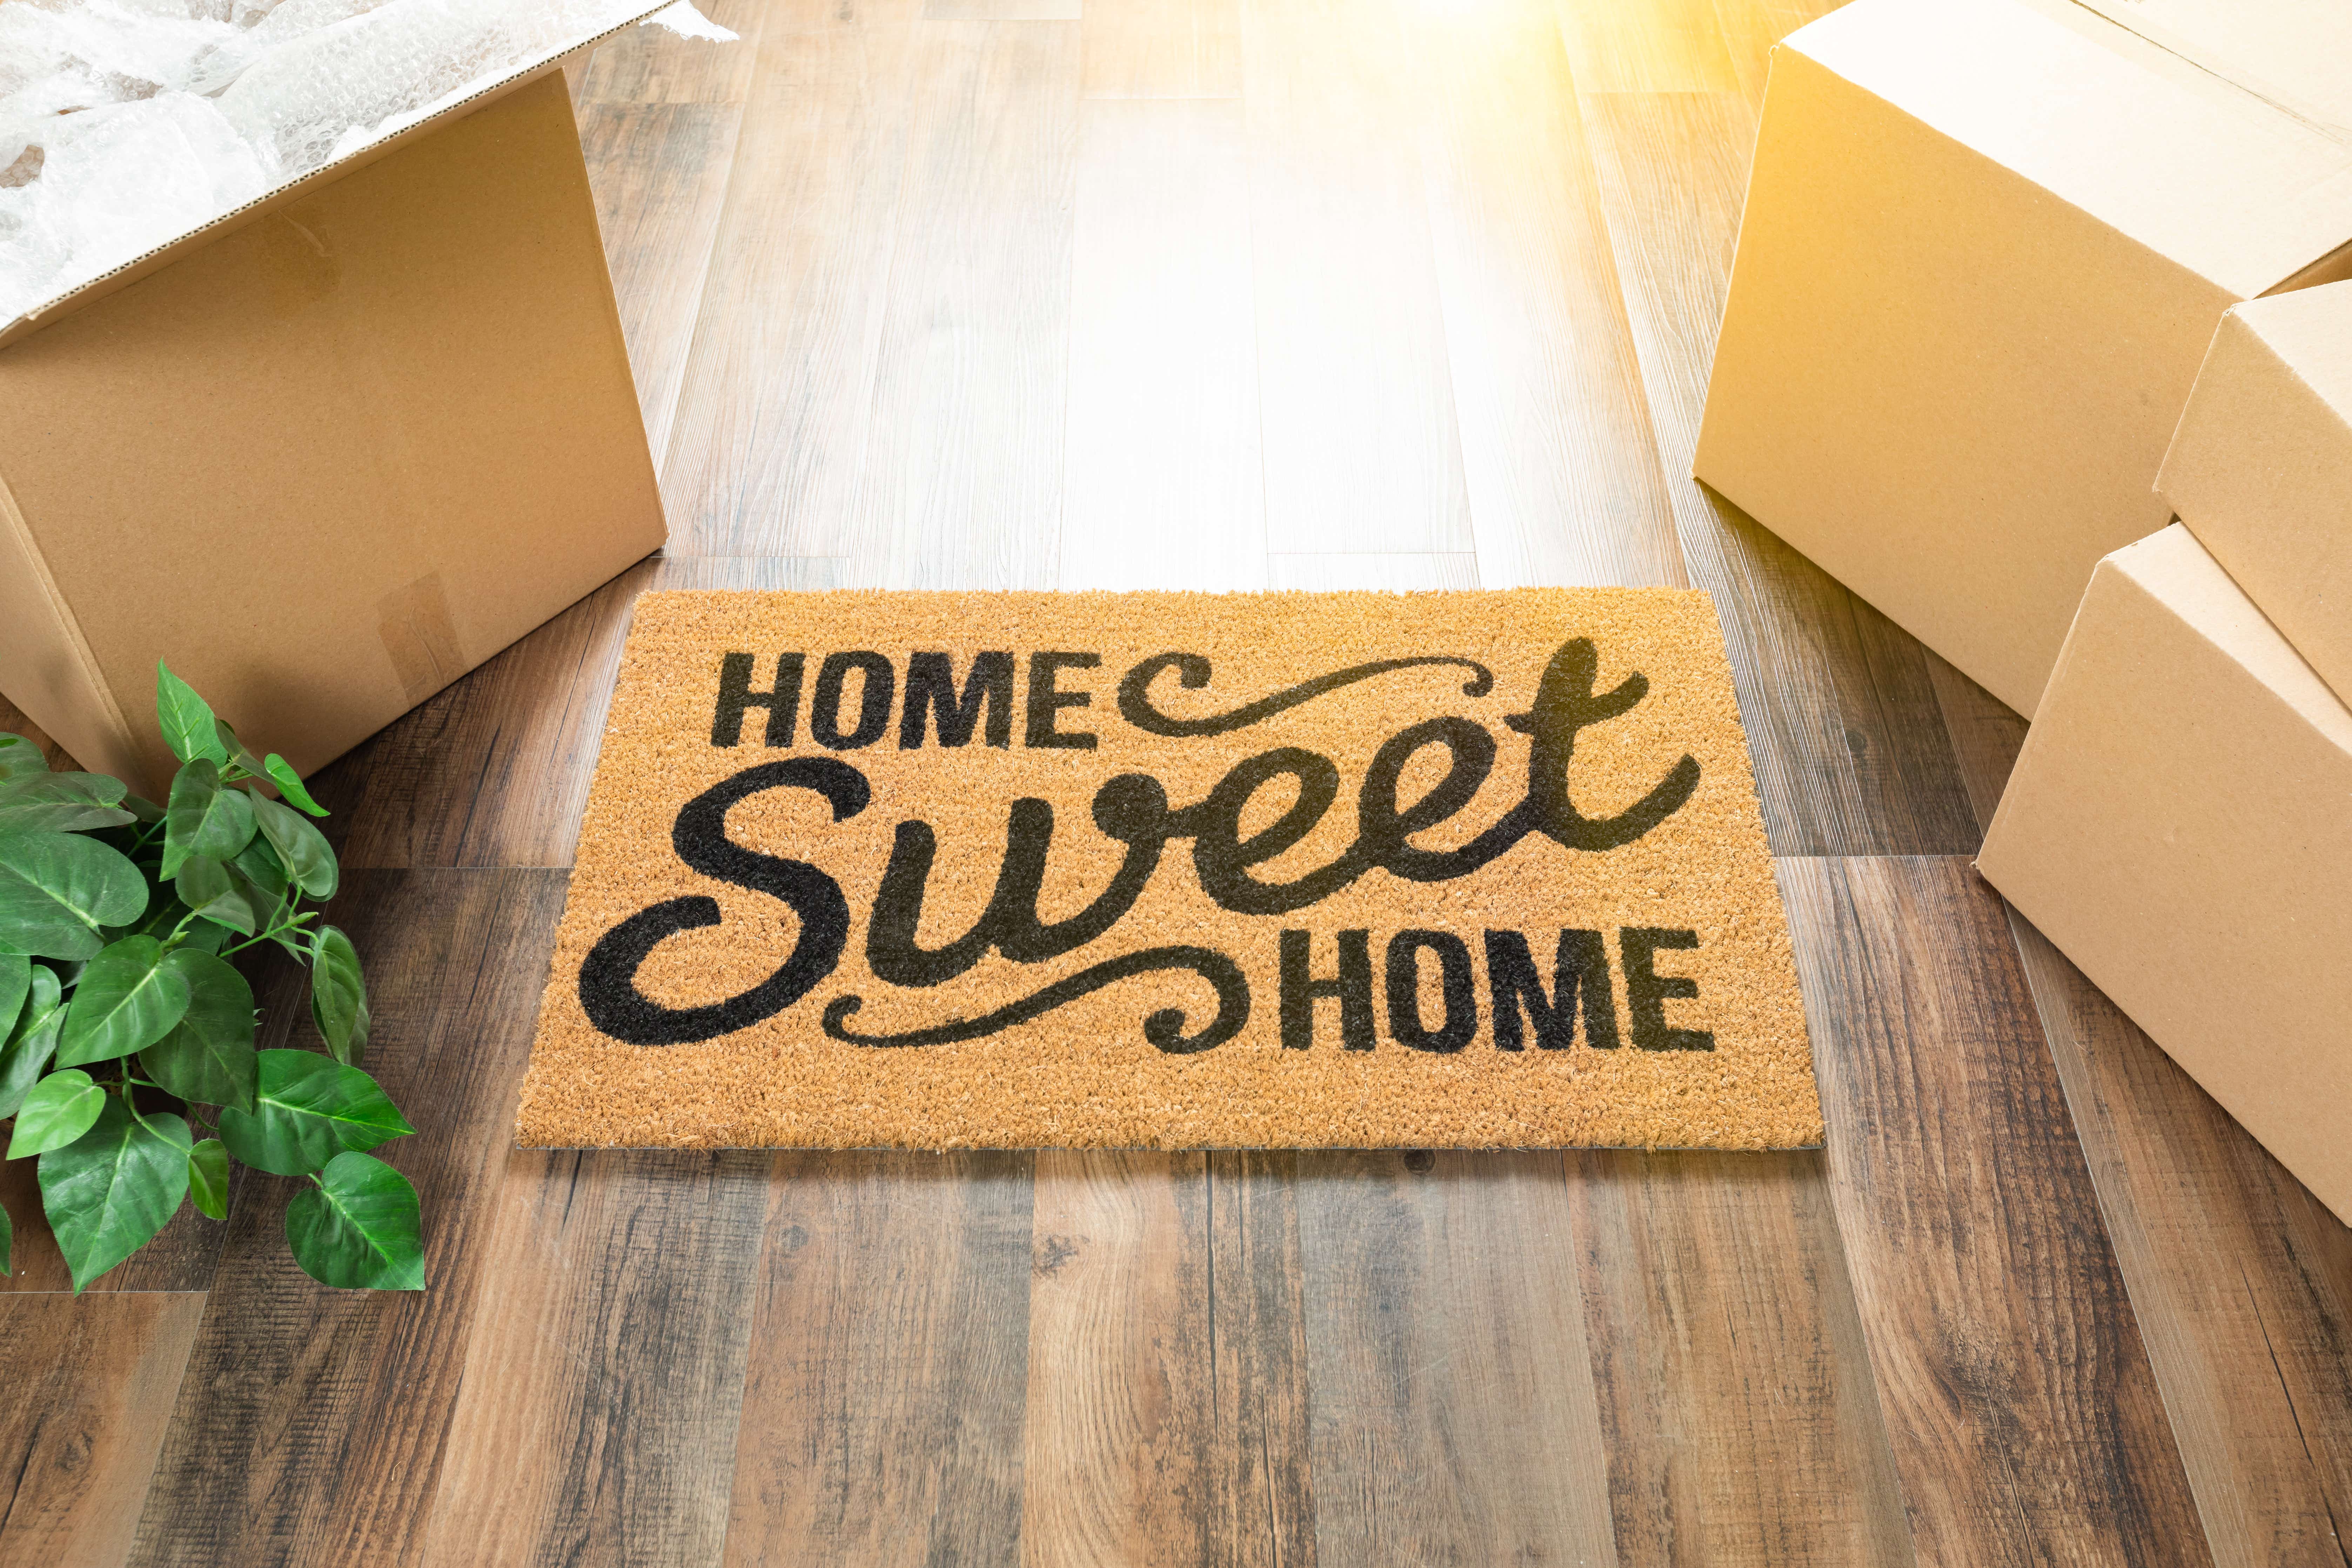 A hessian door mat which has the words 'Home sweet home' printed on it sits on the floor of a sunny hallway, surrounded by cardboard boxes and a house plant